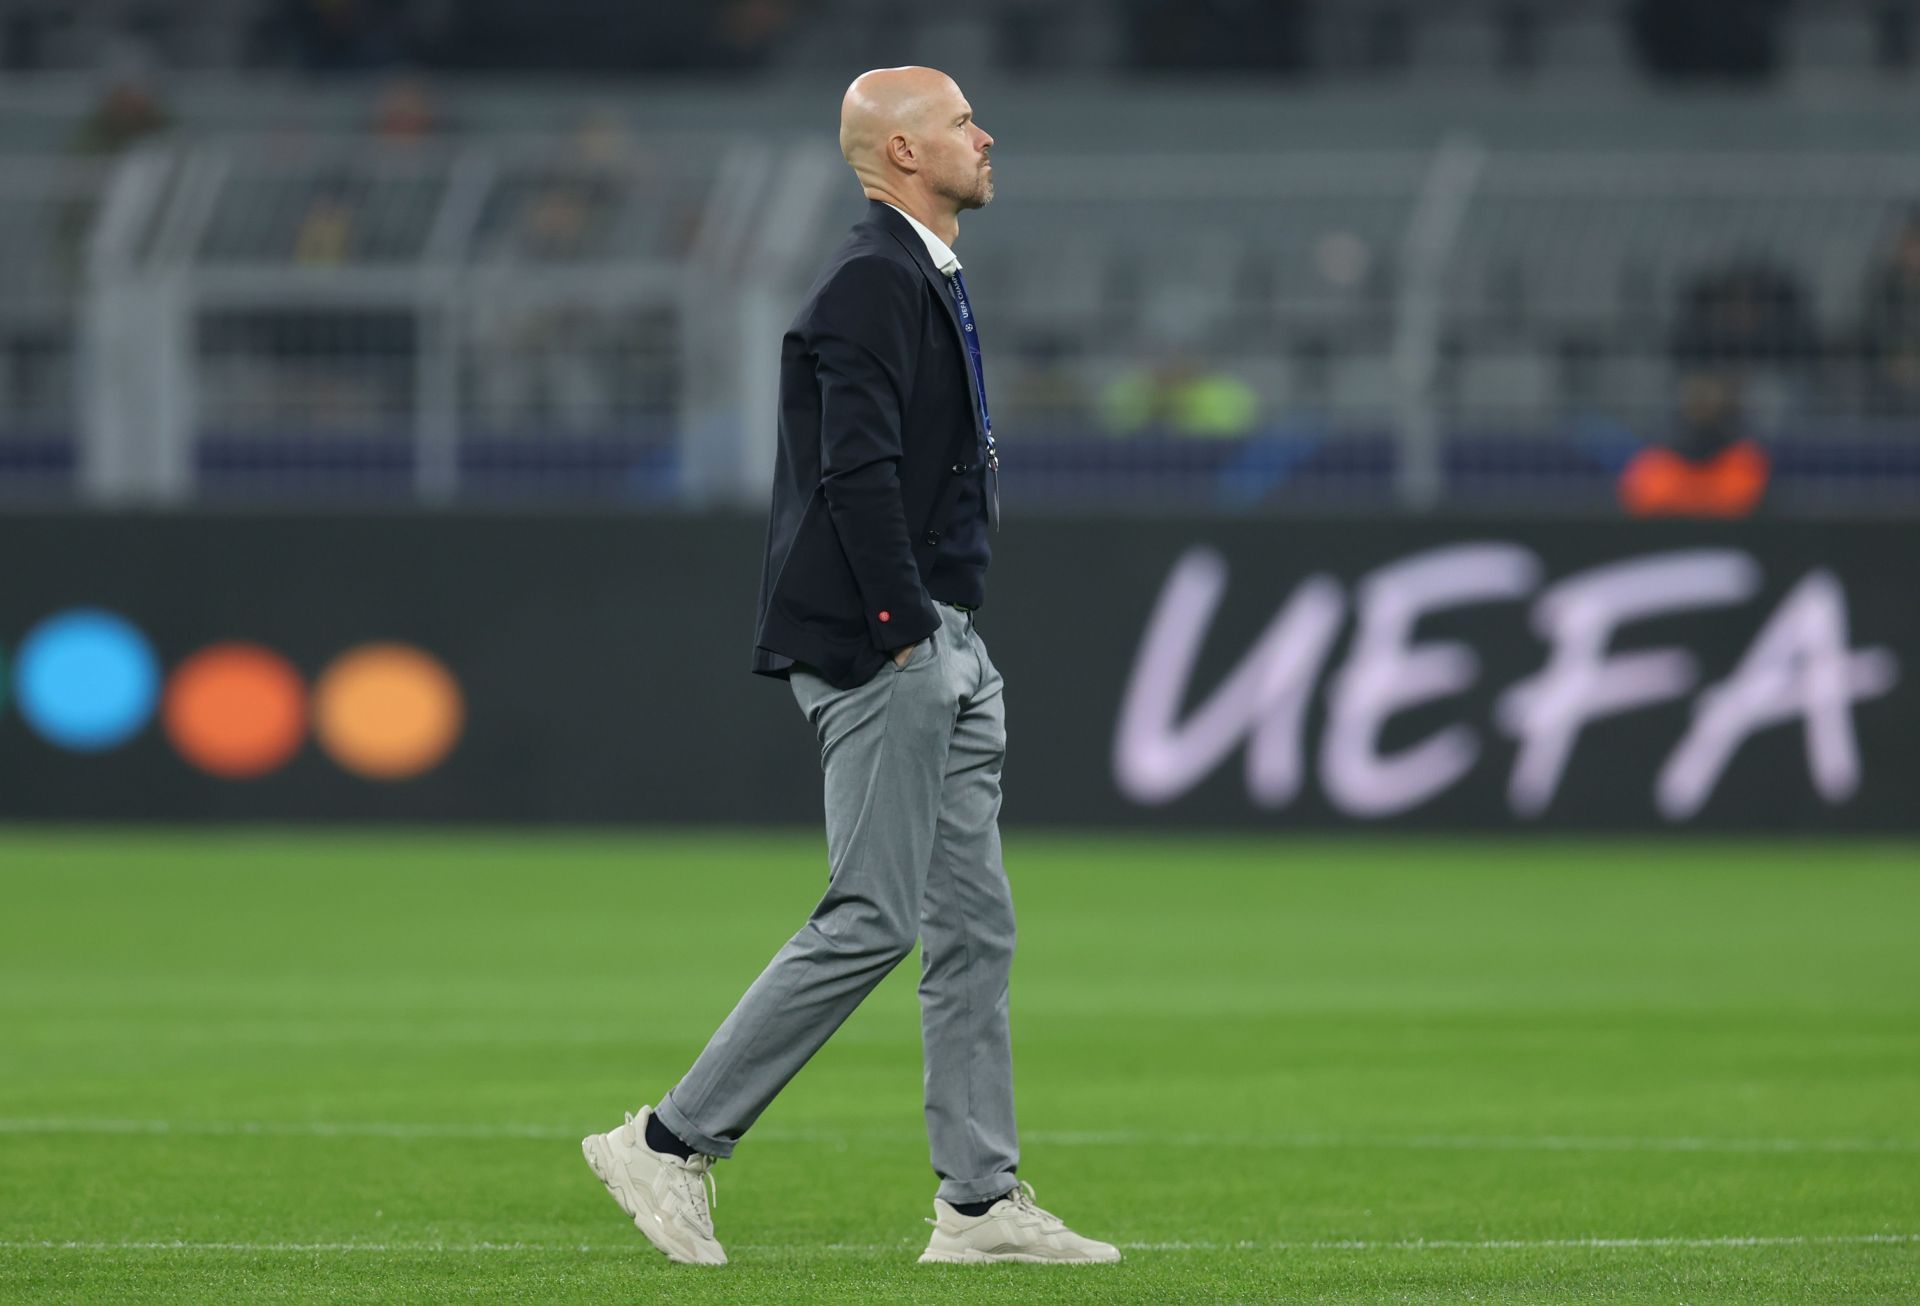 Erik ten Hag could be the next Red Devils manager